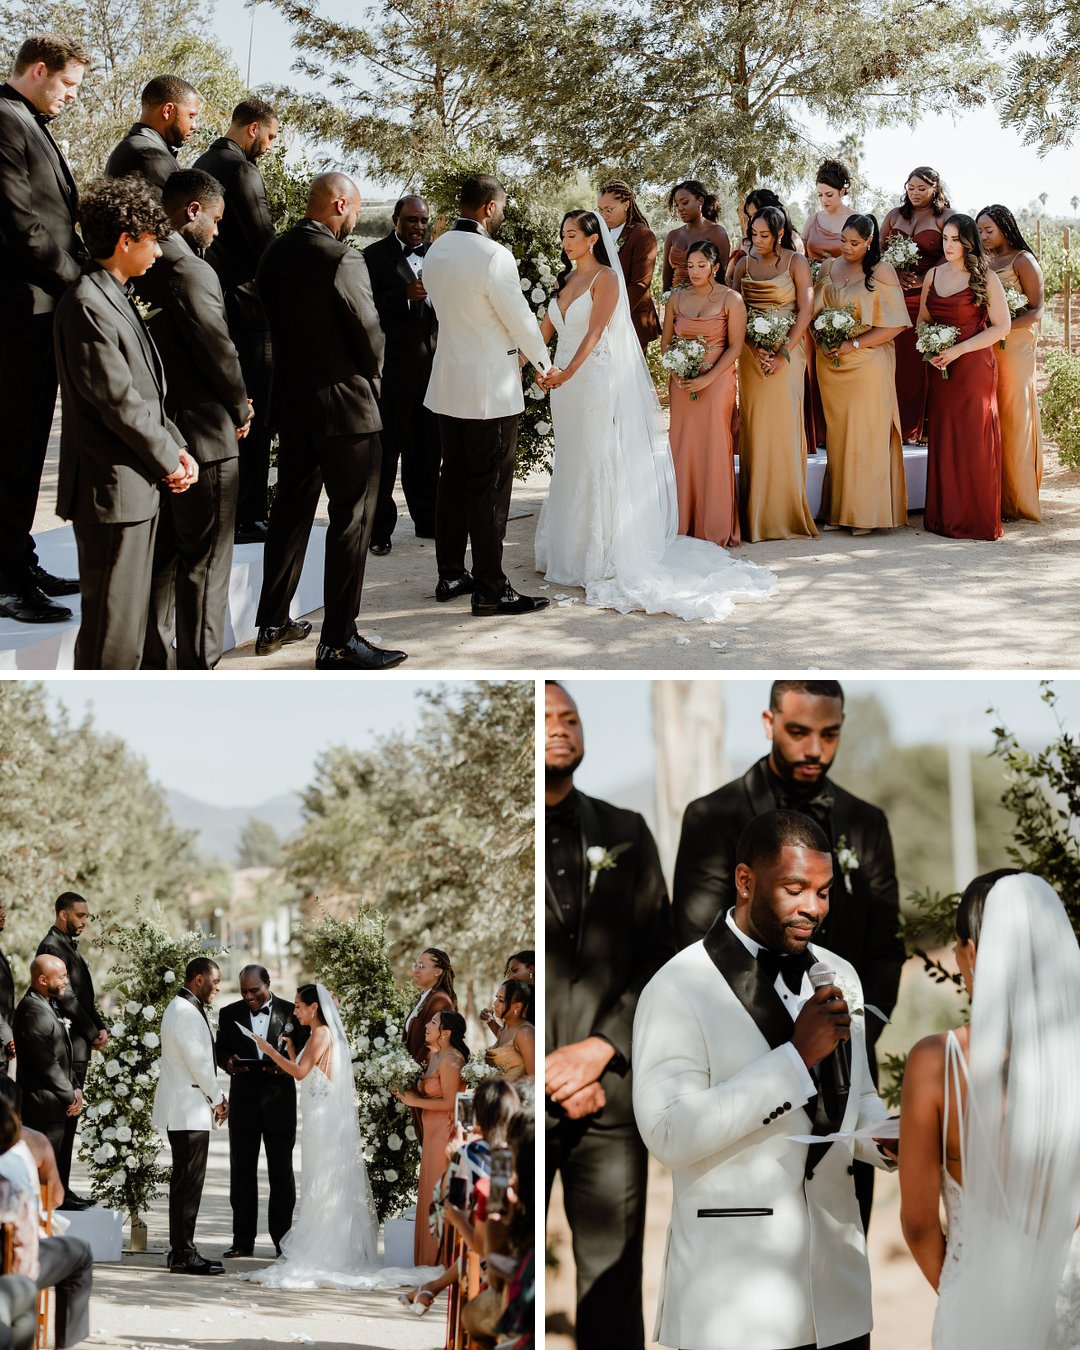 couple pray to open their Valle de Guadalupe wedding ceremony, then share vows